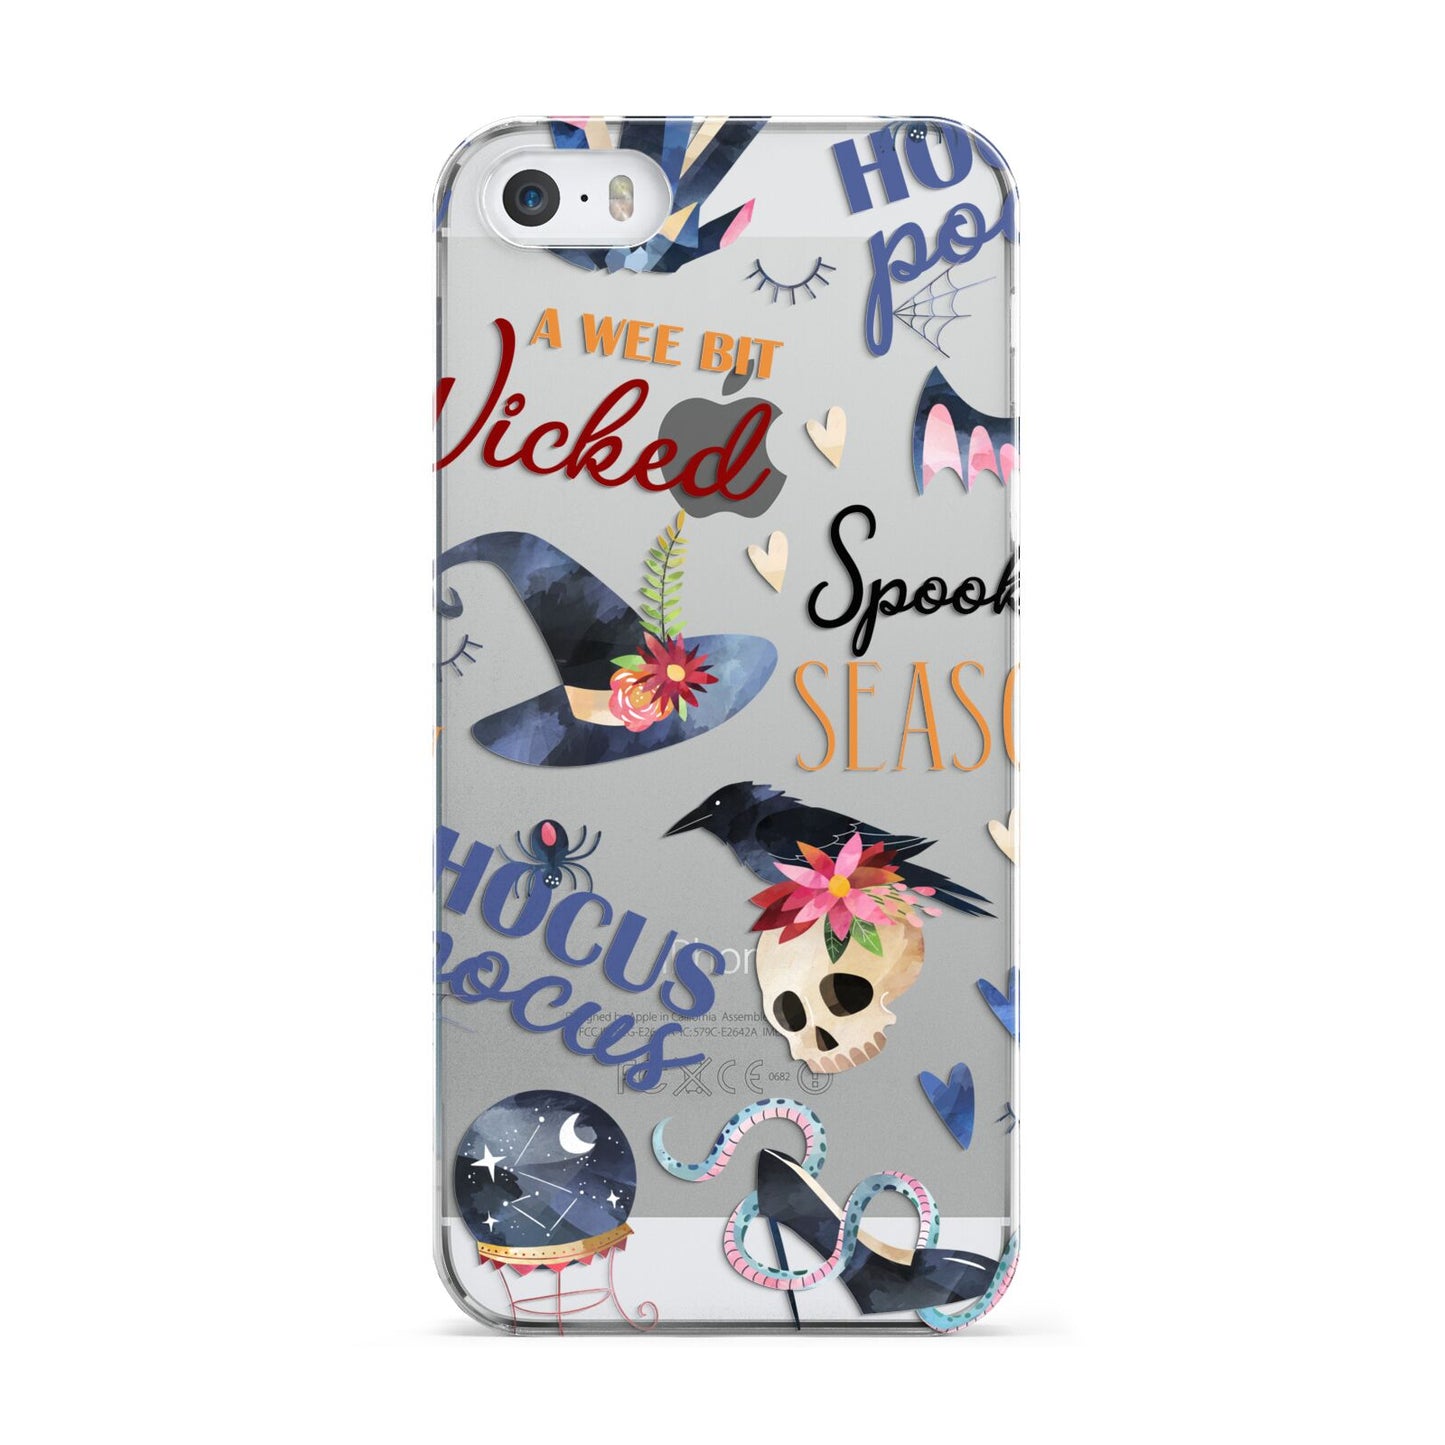 Fun Halloween Catchphrases and Watercolour Illustrations Apple iPhone 5 Case